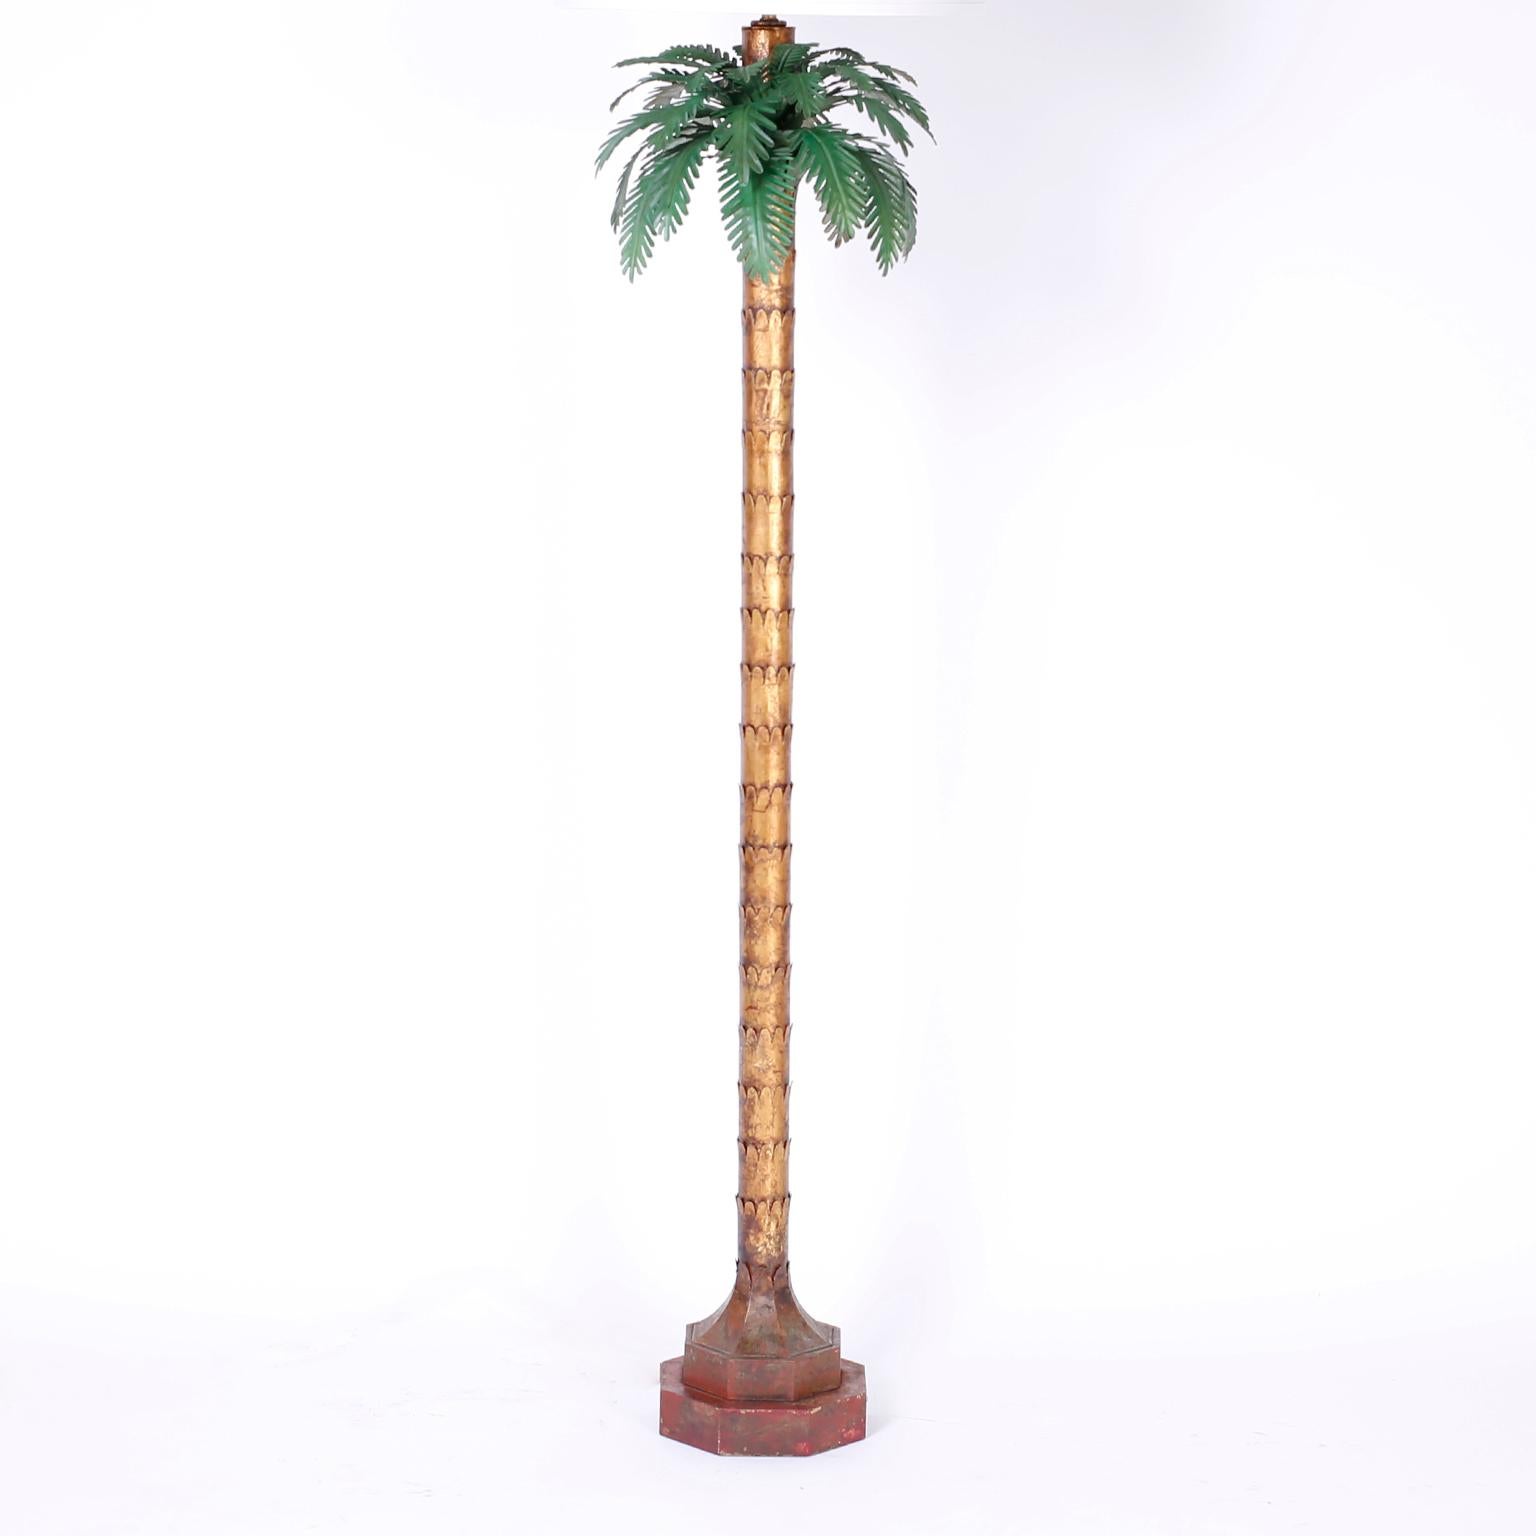 With a combination of old world charm and modern elegance this Palm Tree floor lamp delivers. The tole leaves are understated and supported by a gilt metal stylized trunk rising from a worn faux marble double plinth base.